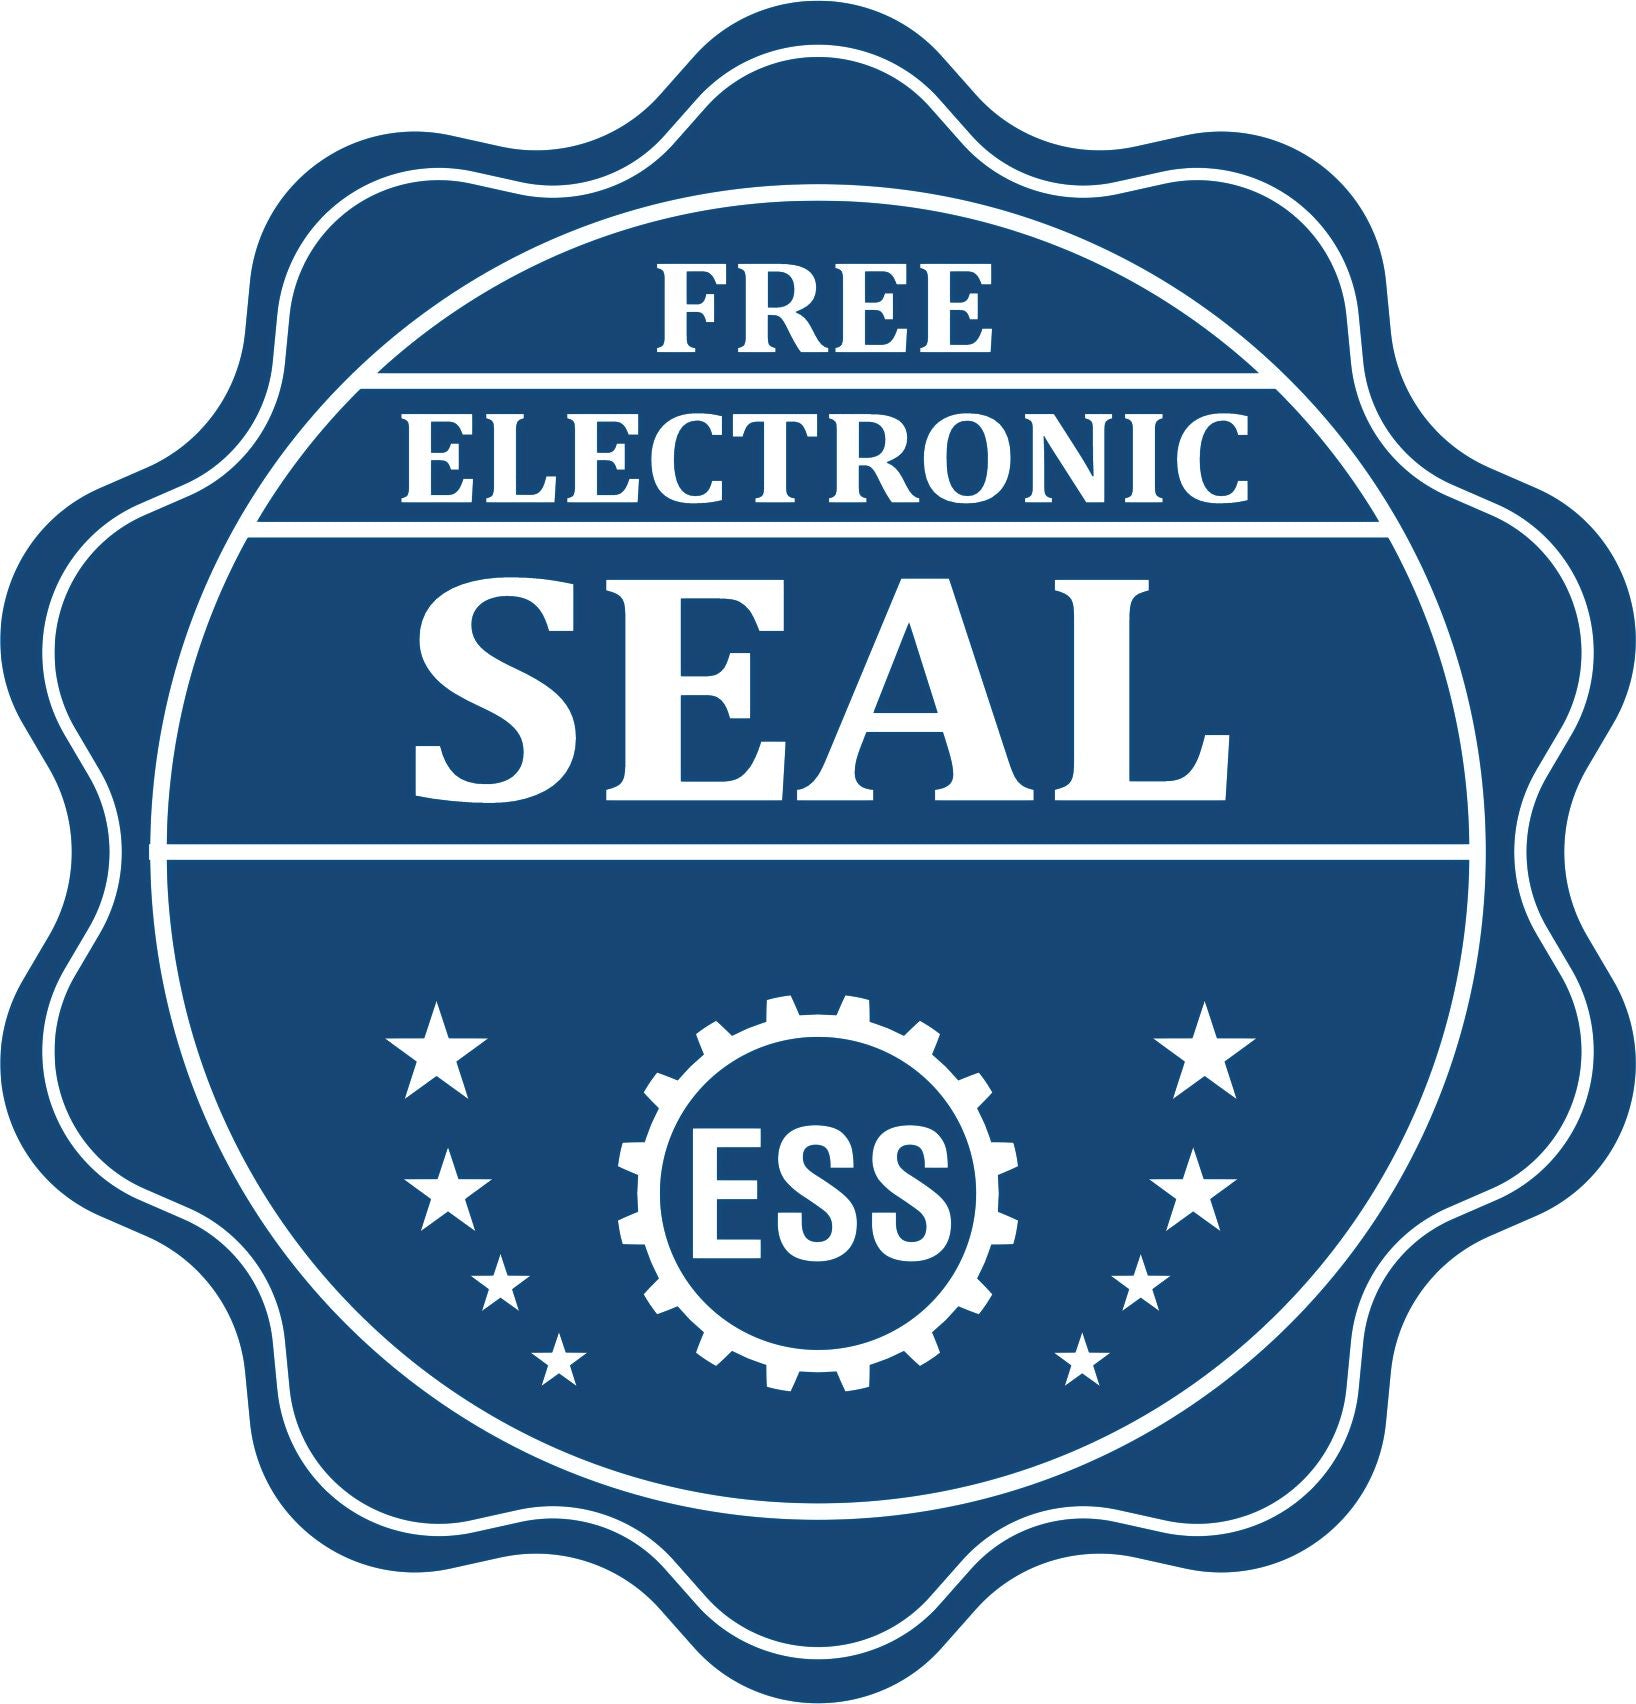 A badge showing a free electronic seal for the Super Slim Mississippi Notary Public Stamp with stars and the ESS gear on the emblem.